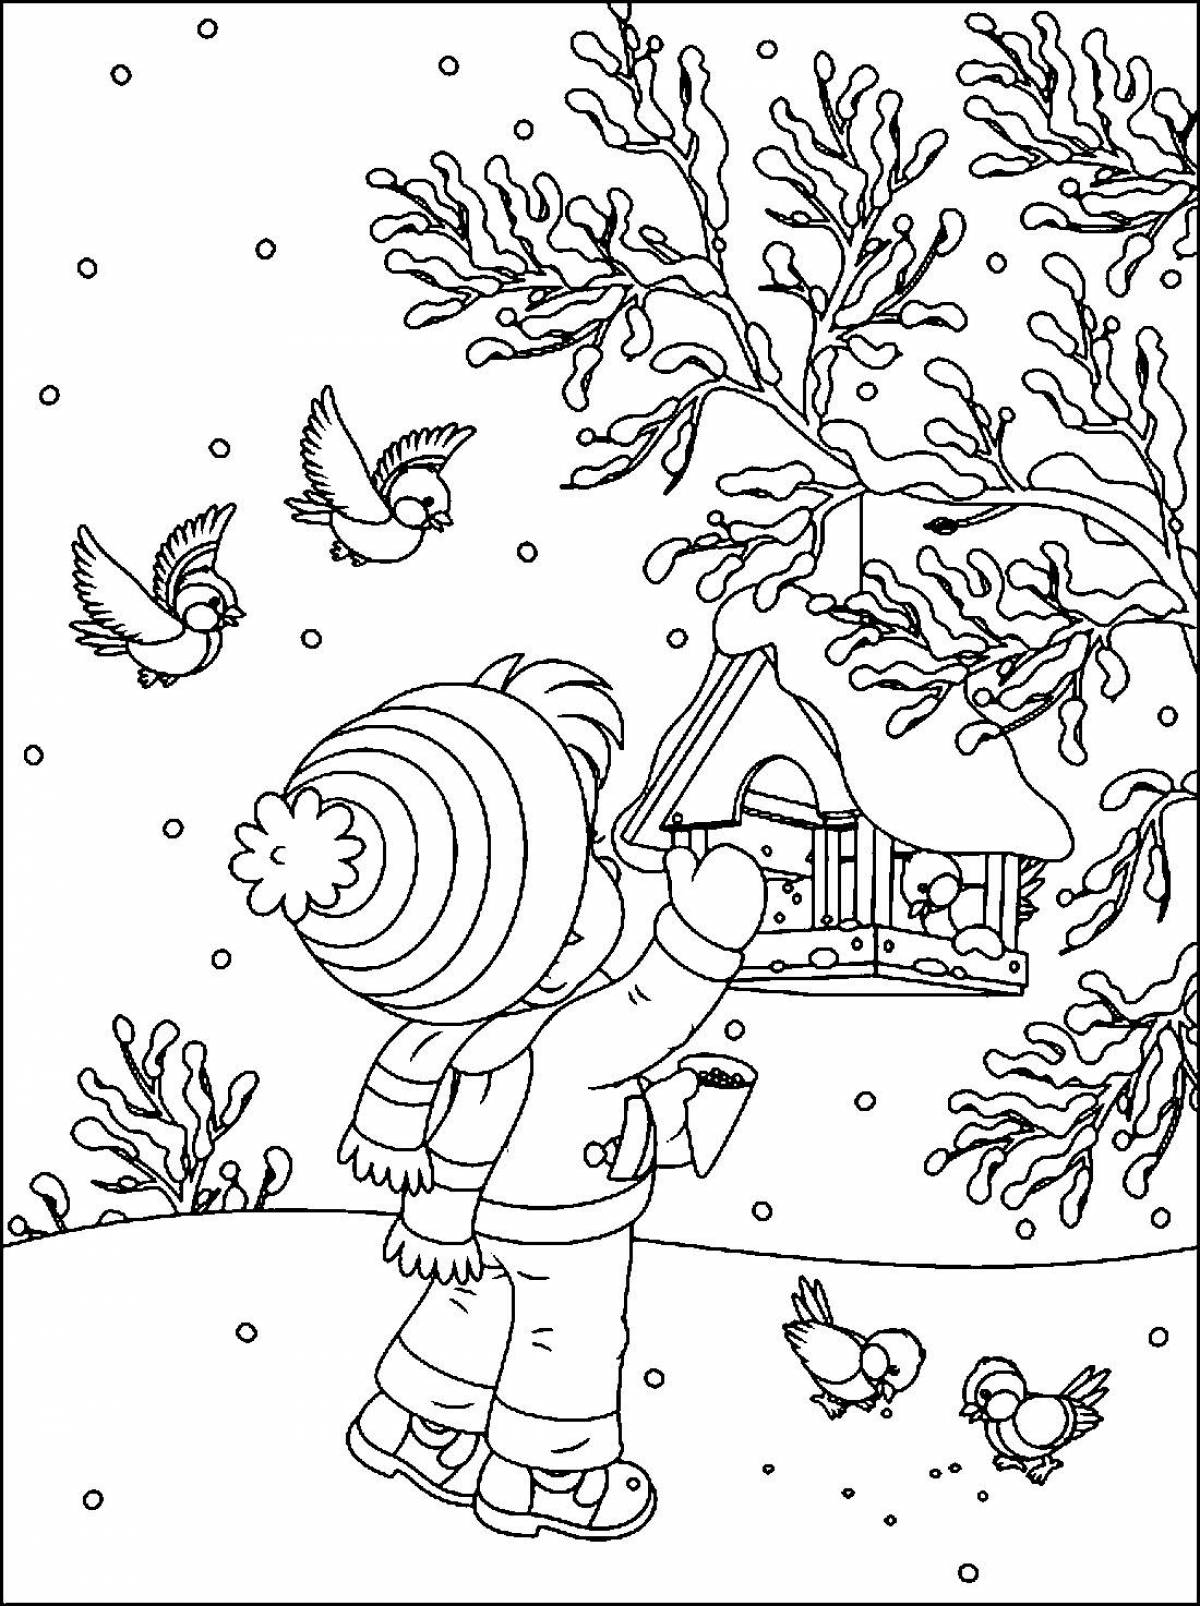 Coloring page graceful feeding of birds in winter